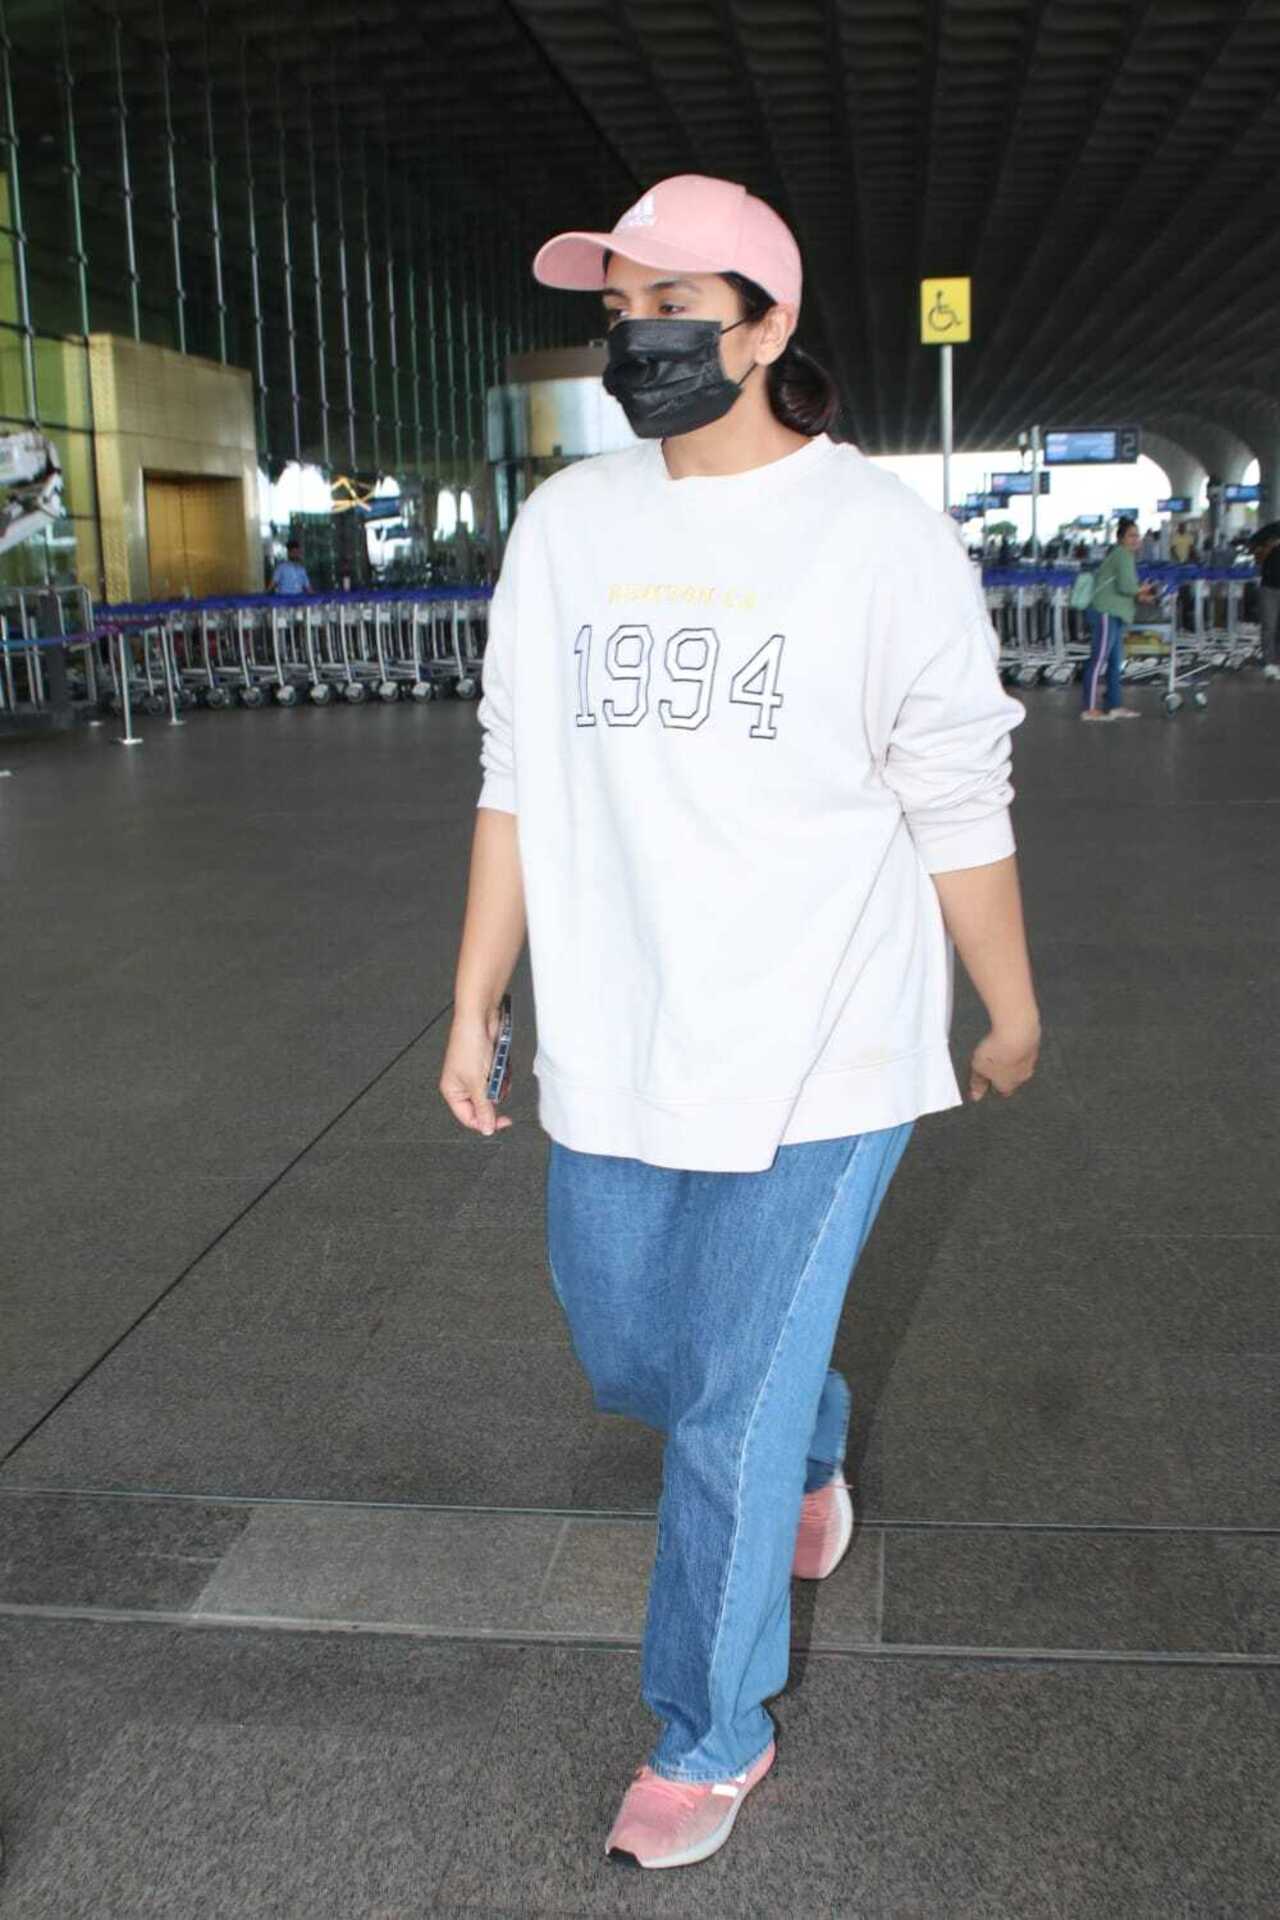 Huma Qureshi was snapped at the airport